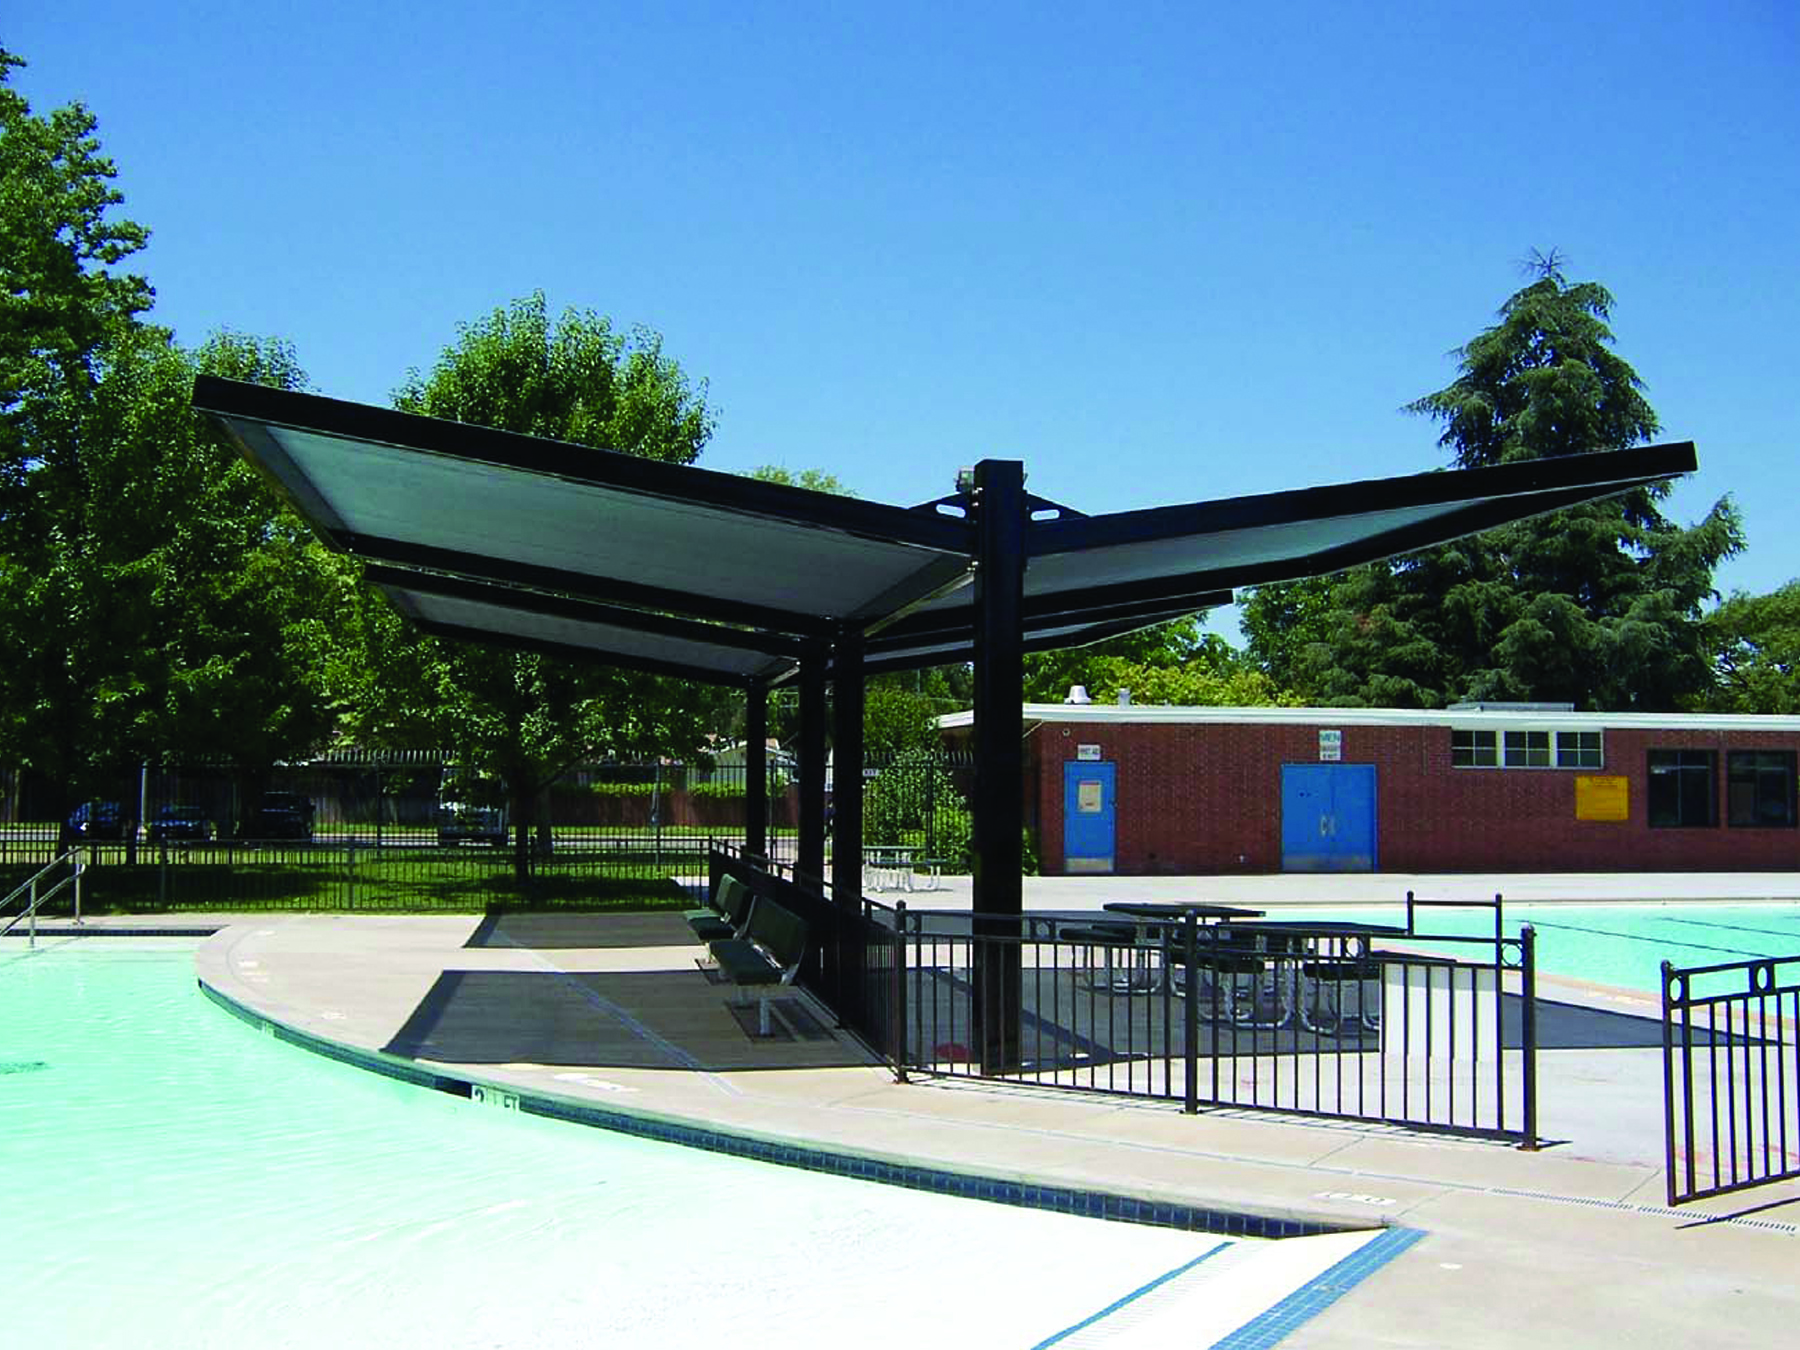 green usa shade structure at outdoor pool